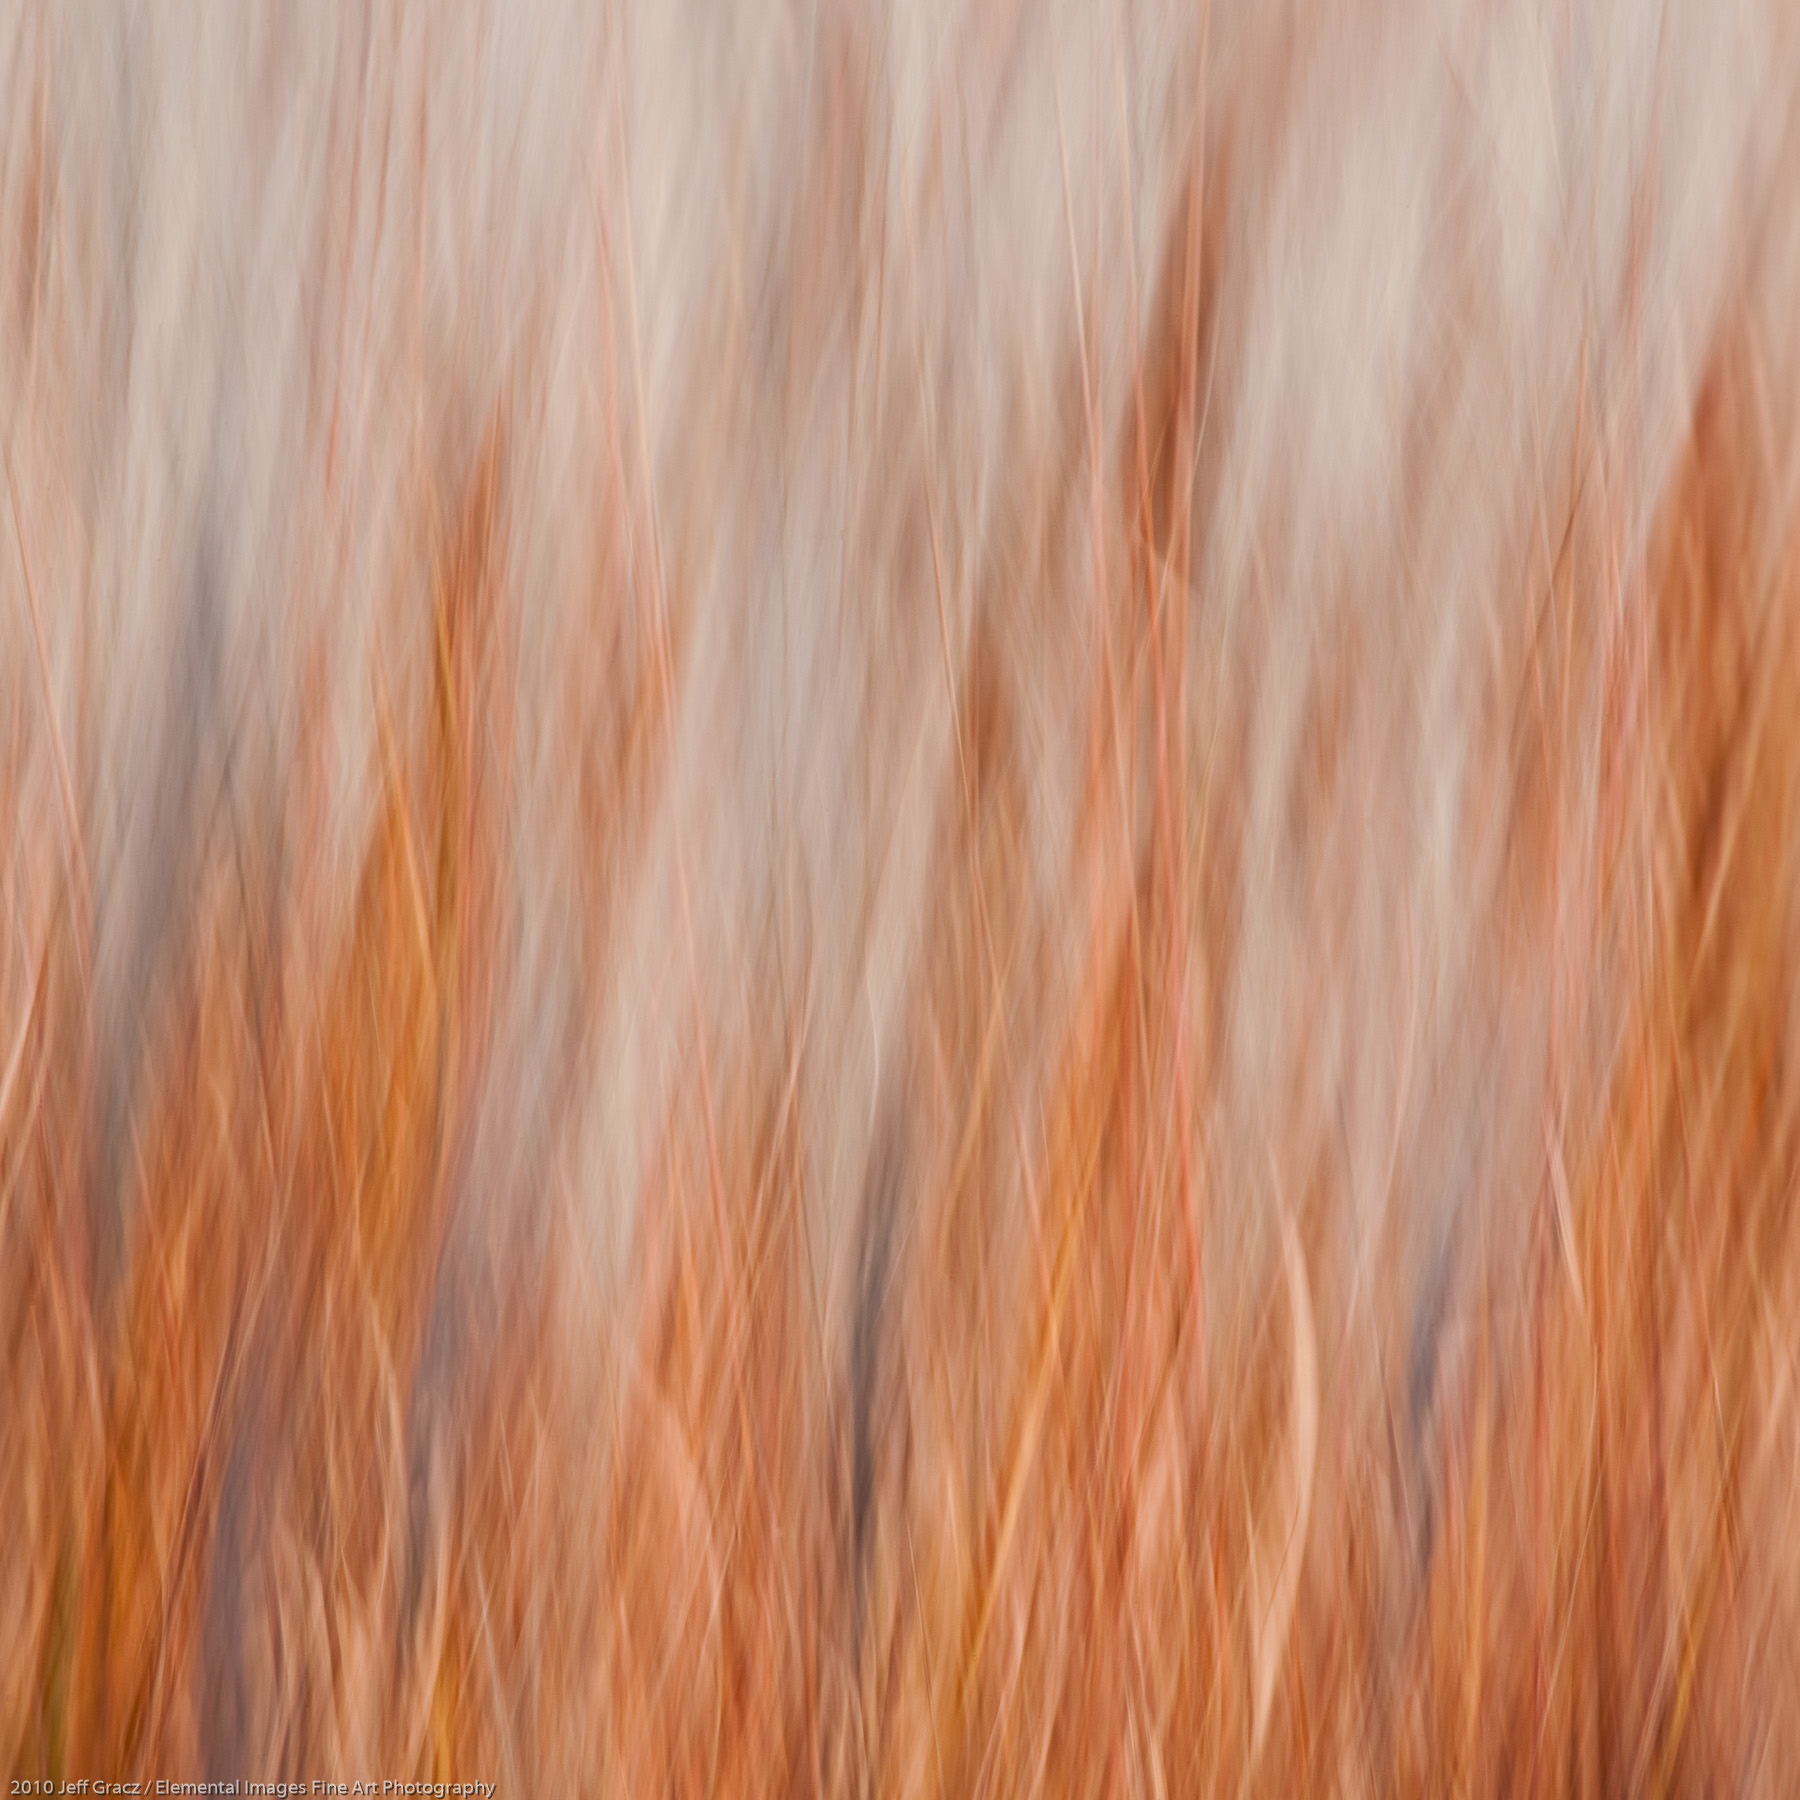 Grasses CXXXV | Portland | OR | USA - © 2010 Jeff Gracz / Elemental Images Fine Art Photography - All Rights Reserved Worldwide